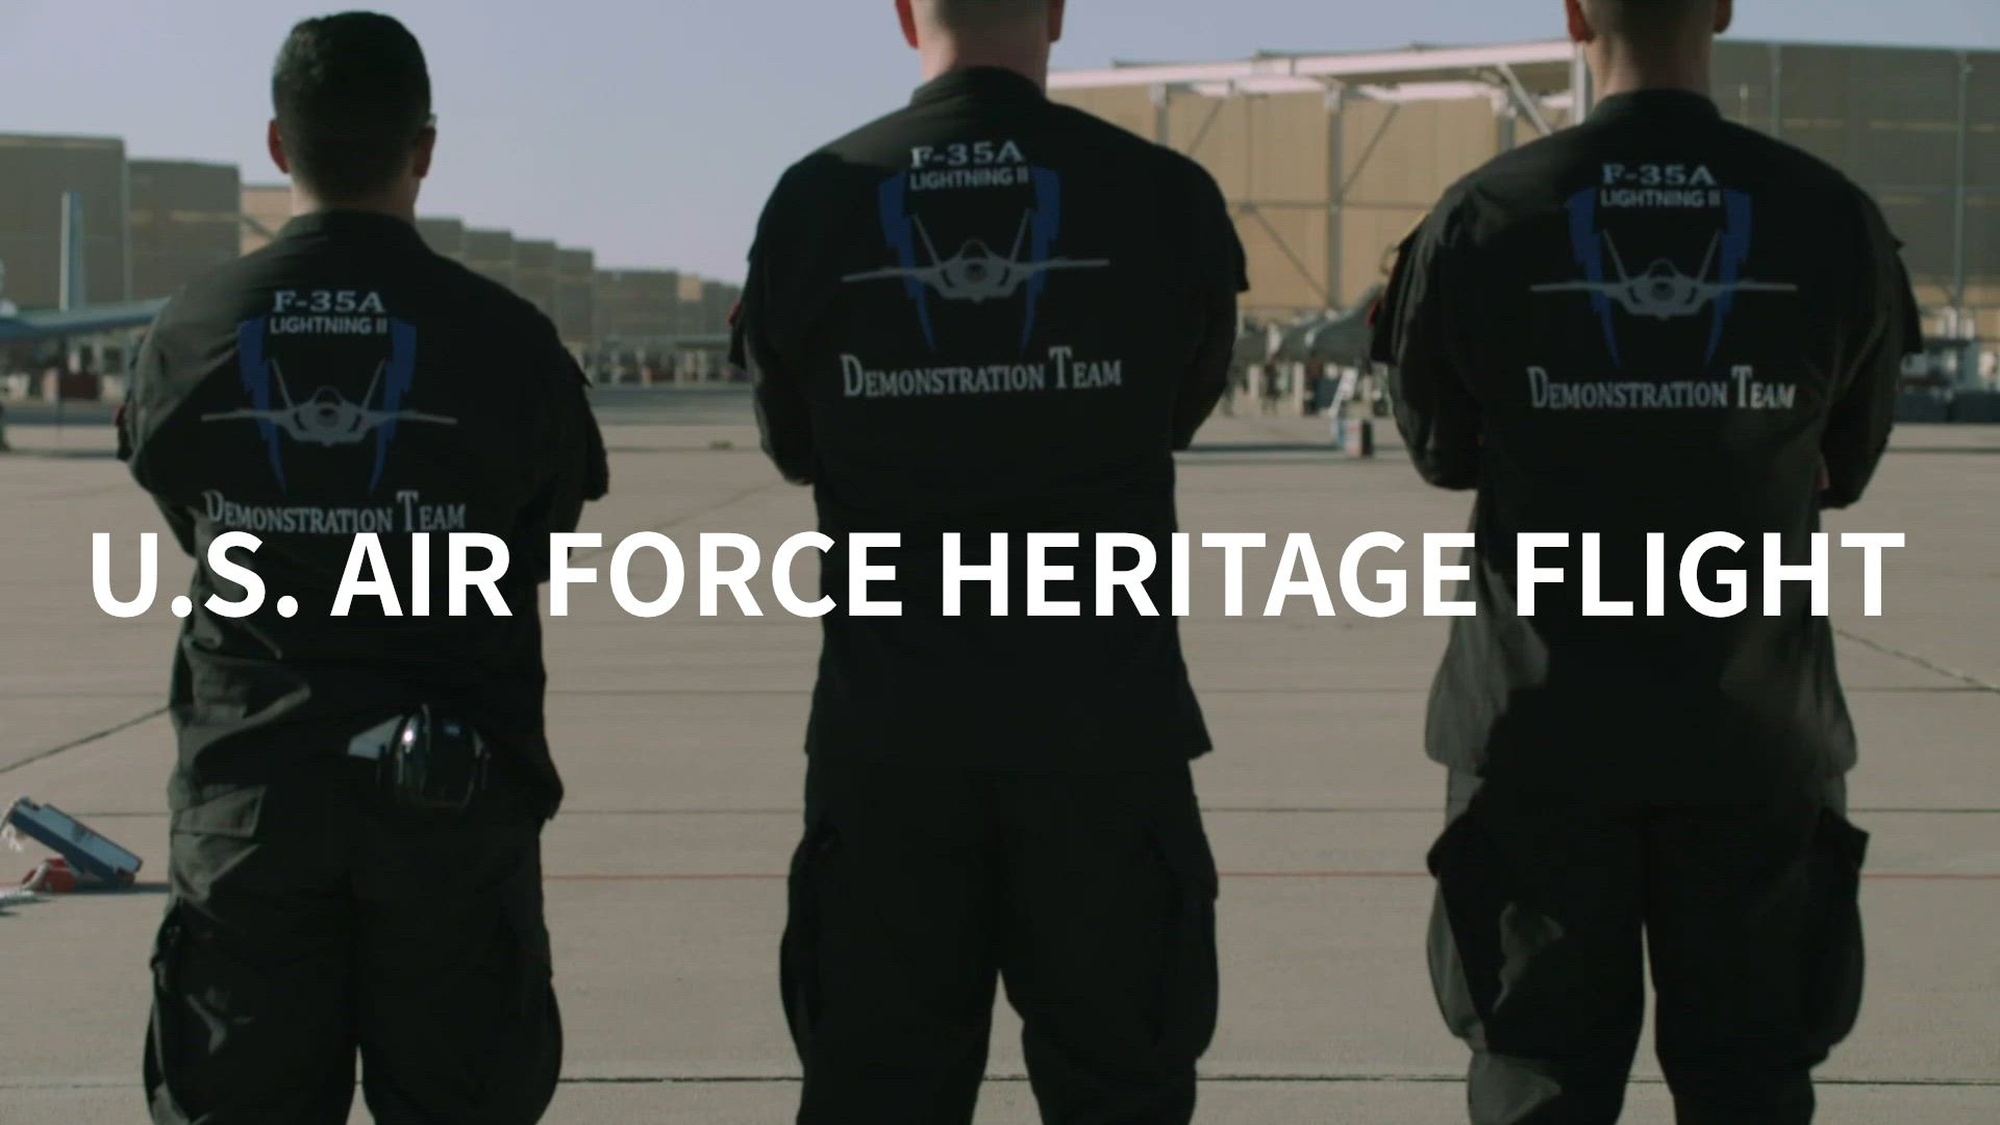 Promotional video for the Air Force Heritage Flight demonstration team set to perform at the Dyess Big Country Air Fest, April 22nd.